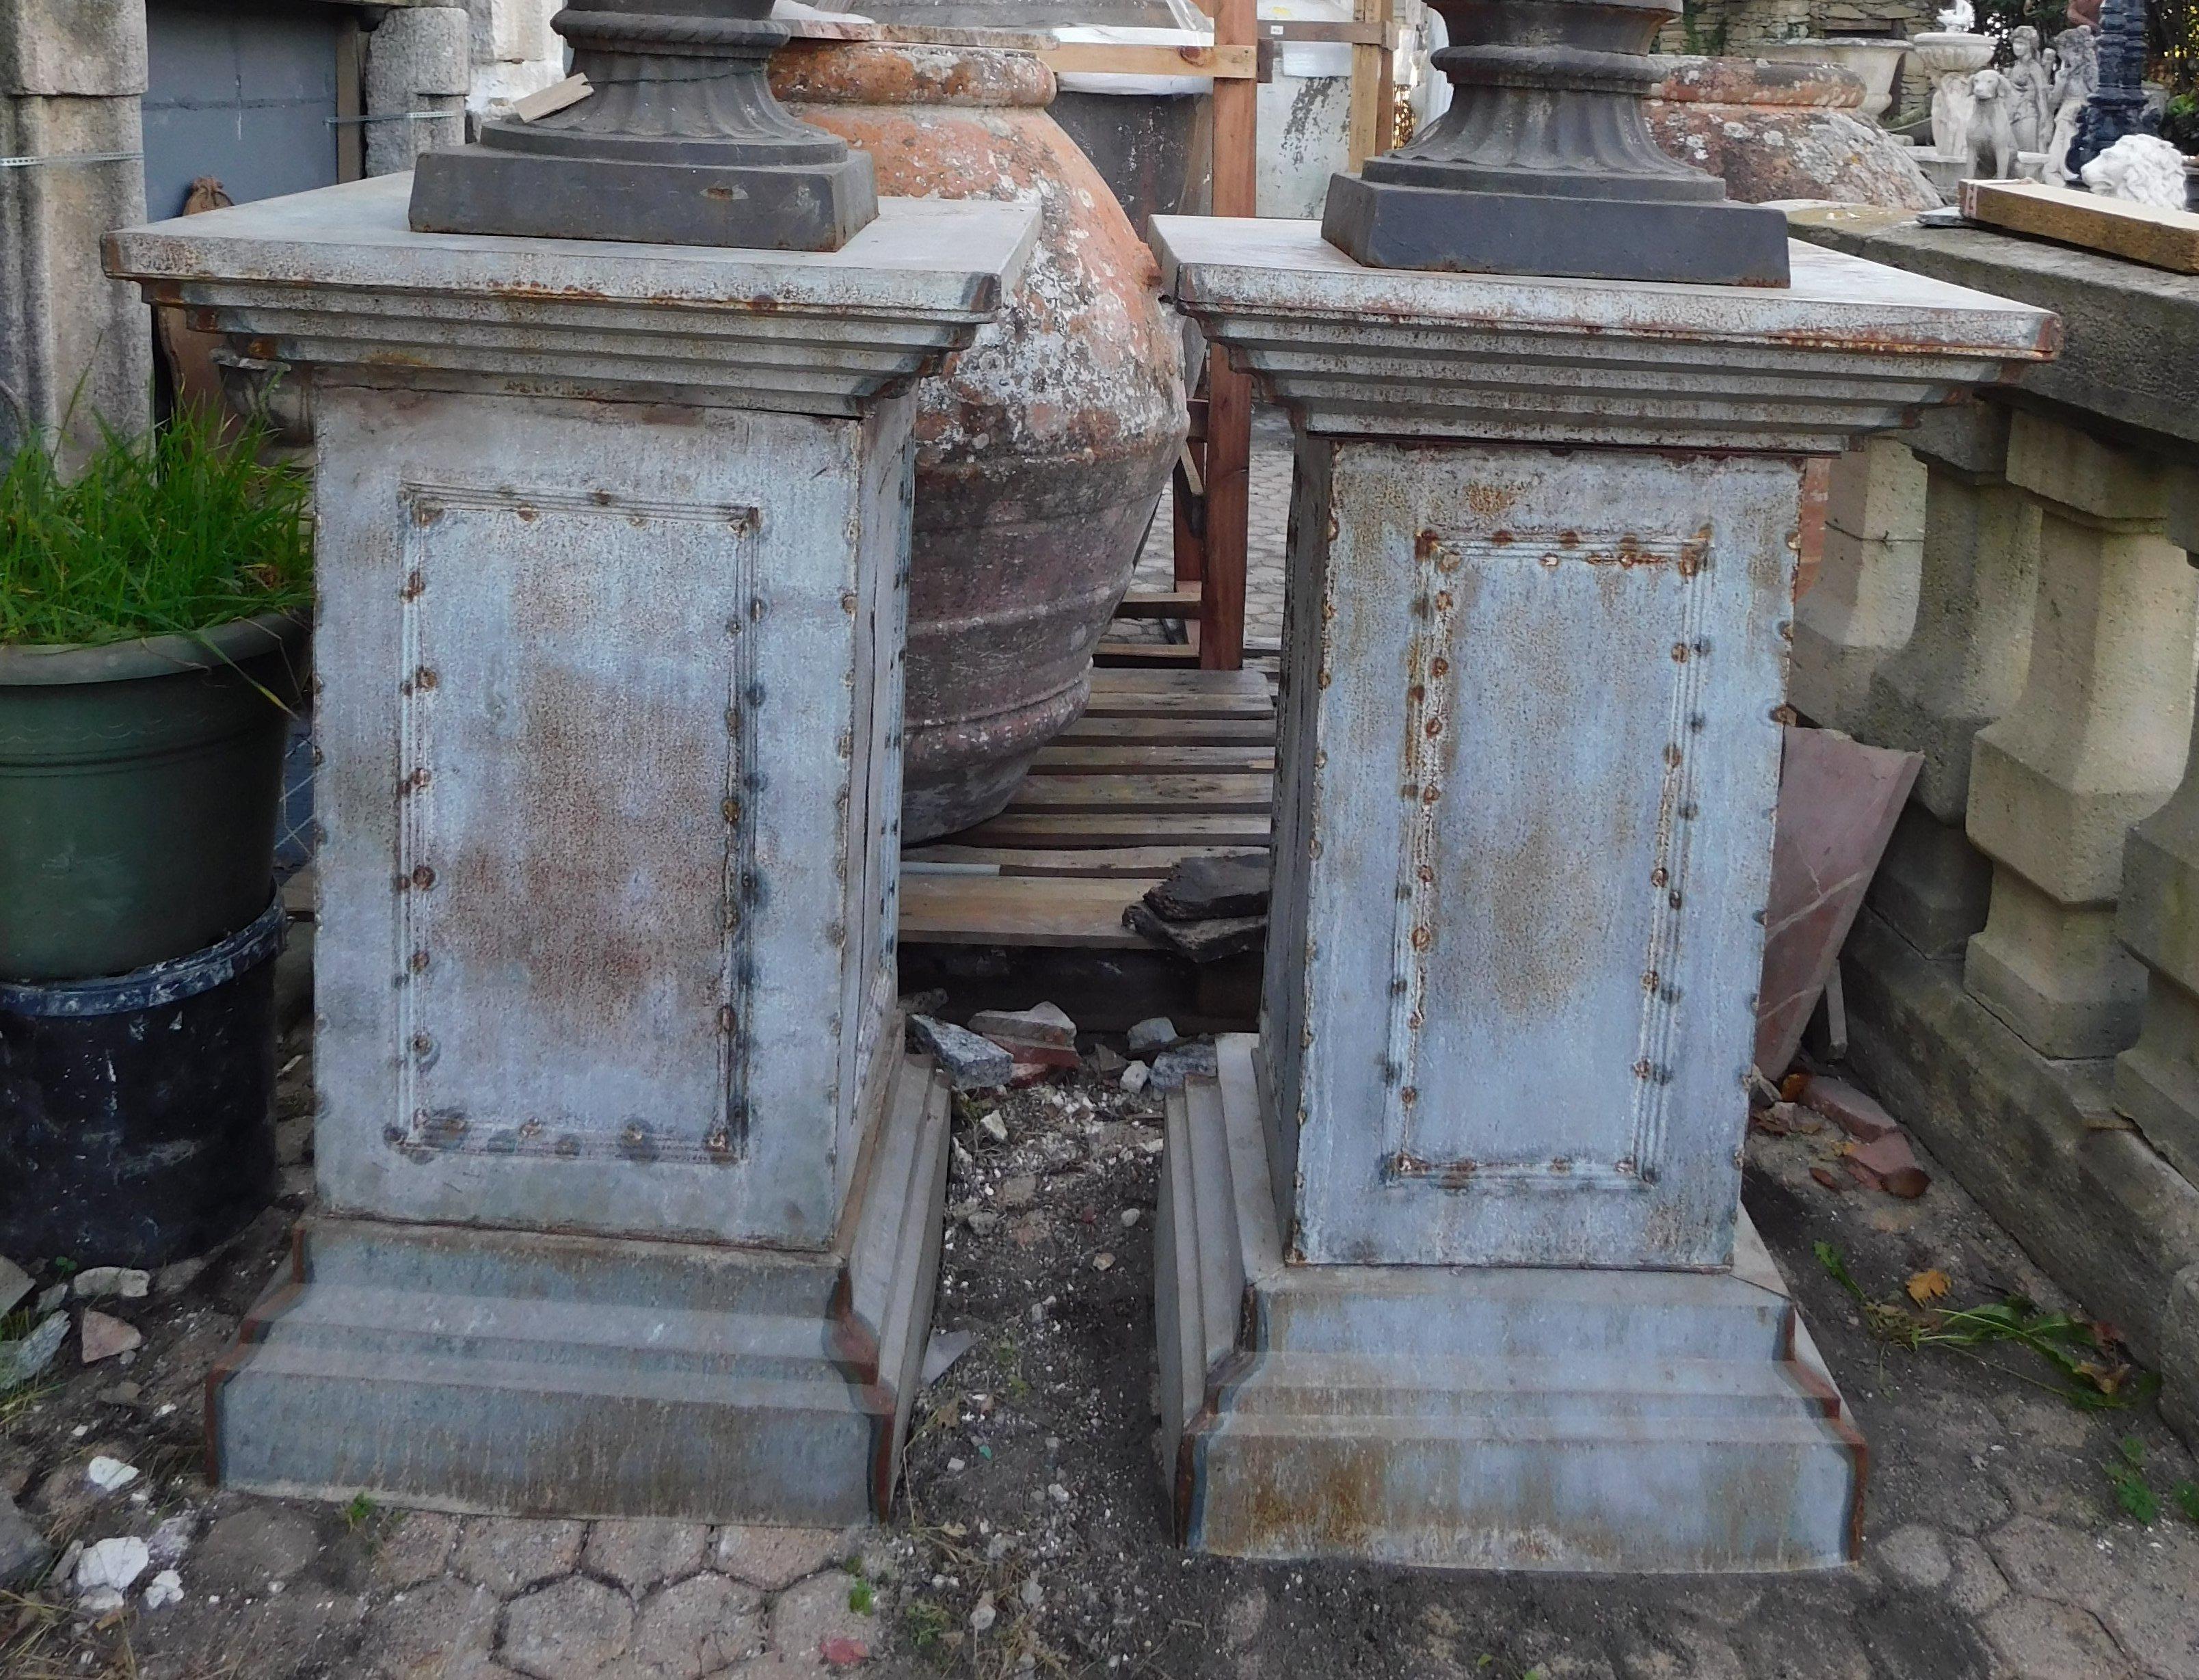 Pair of sheet metal vase or statue holder pedestals, excellent support bases for both indoors and outdoors, ideal in an entrance or in a garden, built in Italy towards the end of the 20th century, maximum size cm W 66 x H 106 x D 66